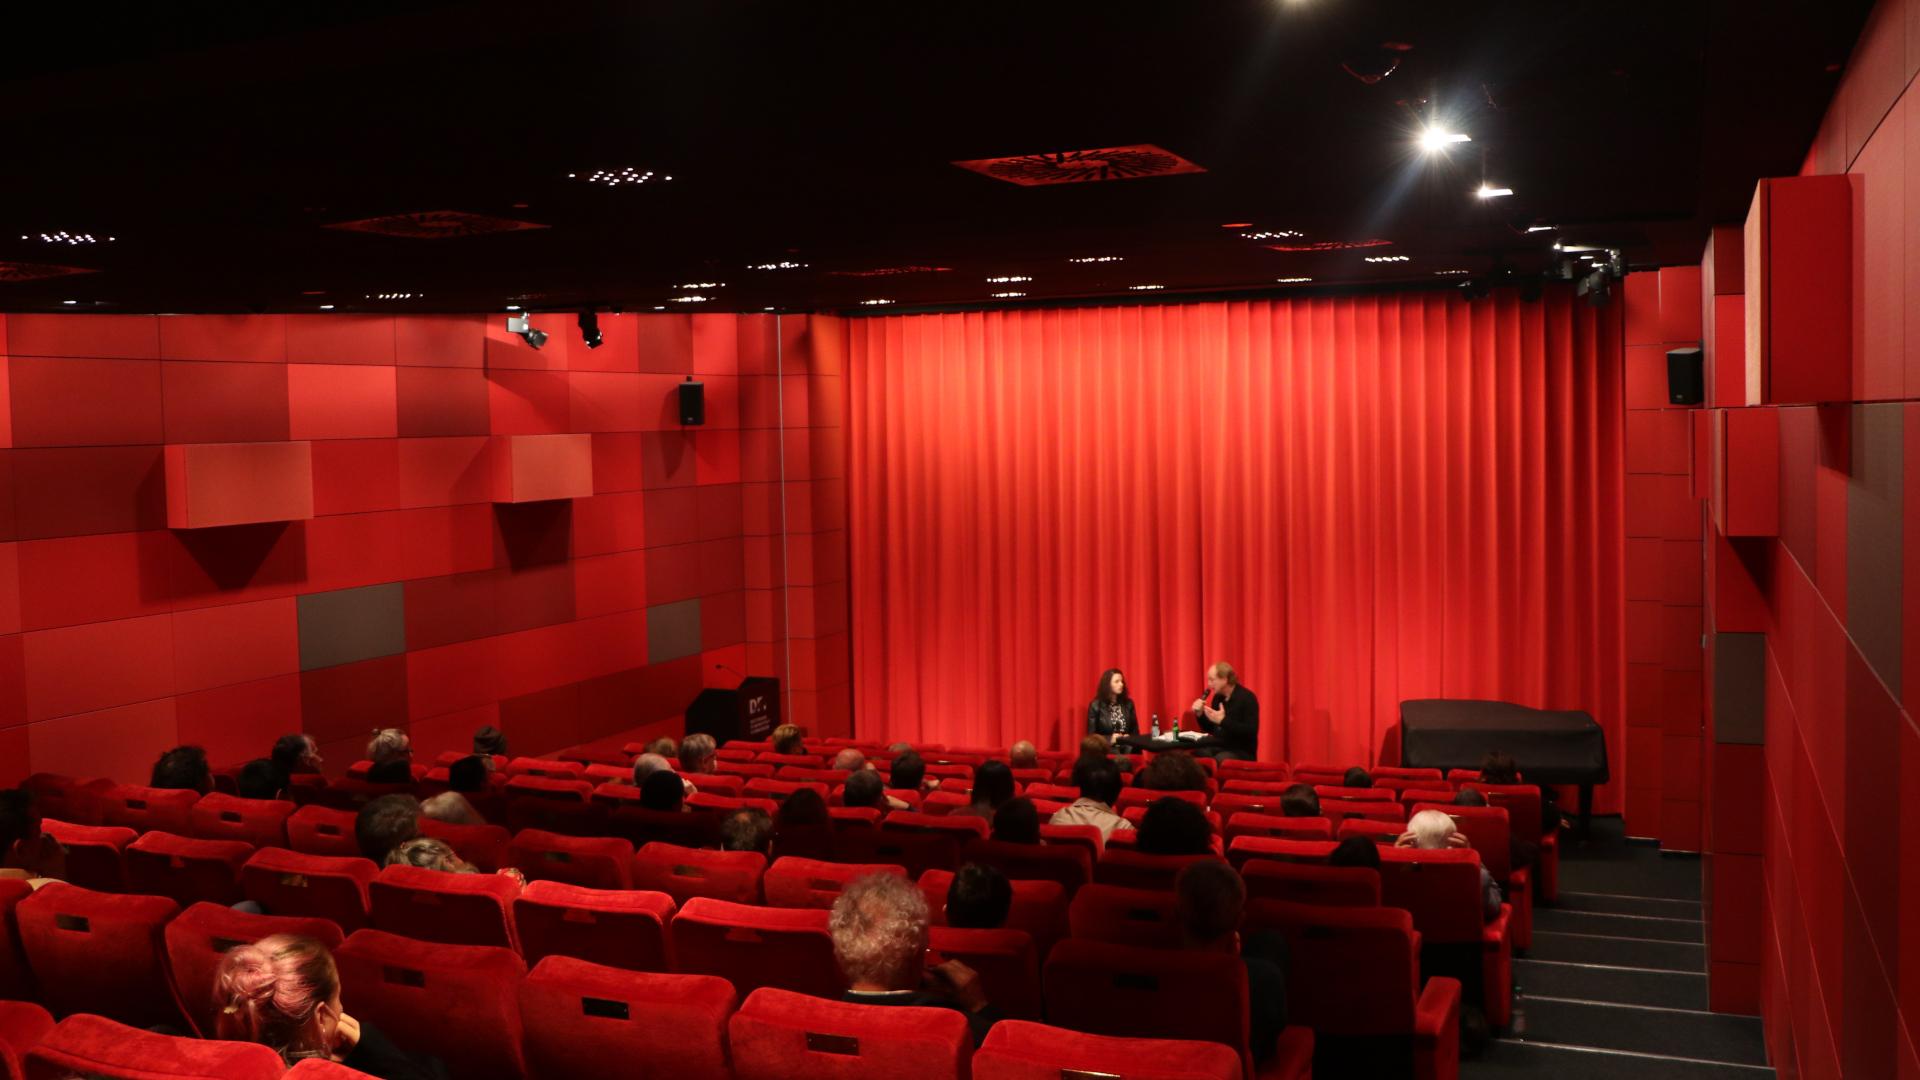 The cinema of the DFF: red velvet chairs, red wall, red curtain; patrons sitting in the seats and in front of the closed curtain sit two people who are in conversation